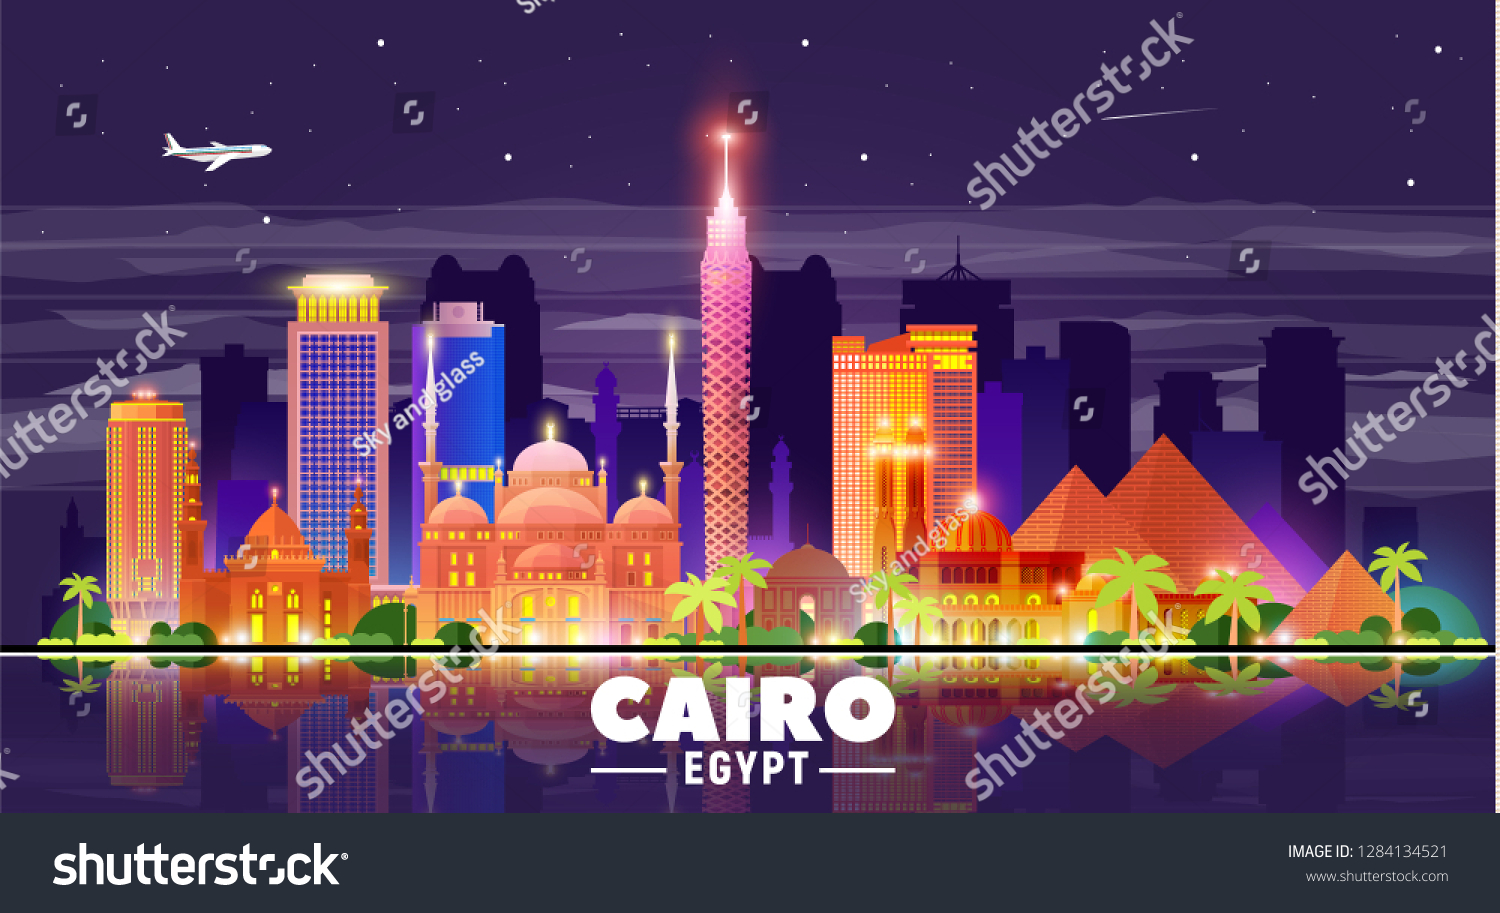 OERJU 12x10ft Cairo Cityscape Photography Backdrop Egypt Capital Modern City Building Photo Background Outdoor Travel Holiday Theme Banner Portrait Photo Shooting Video Video Studio Props